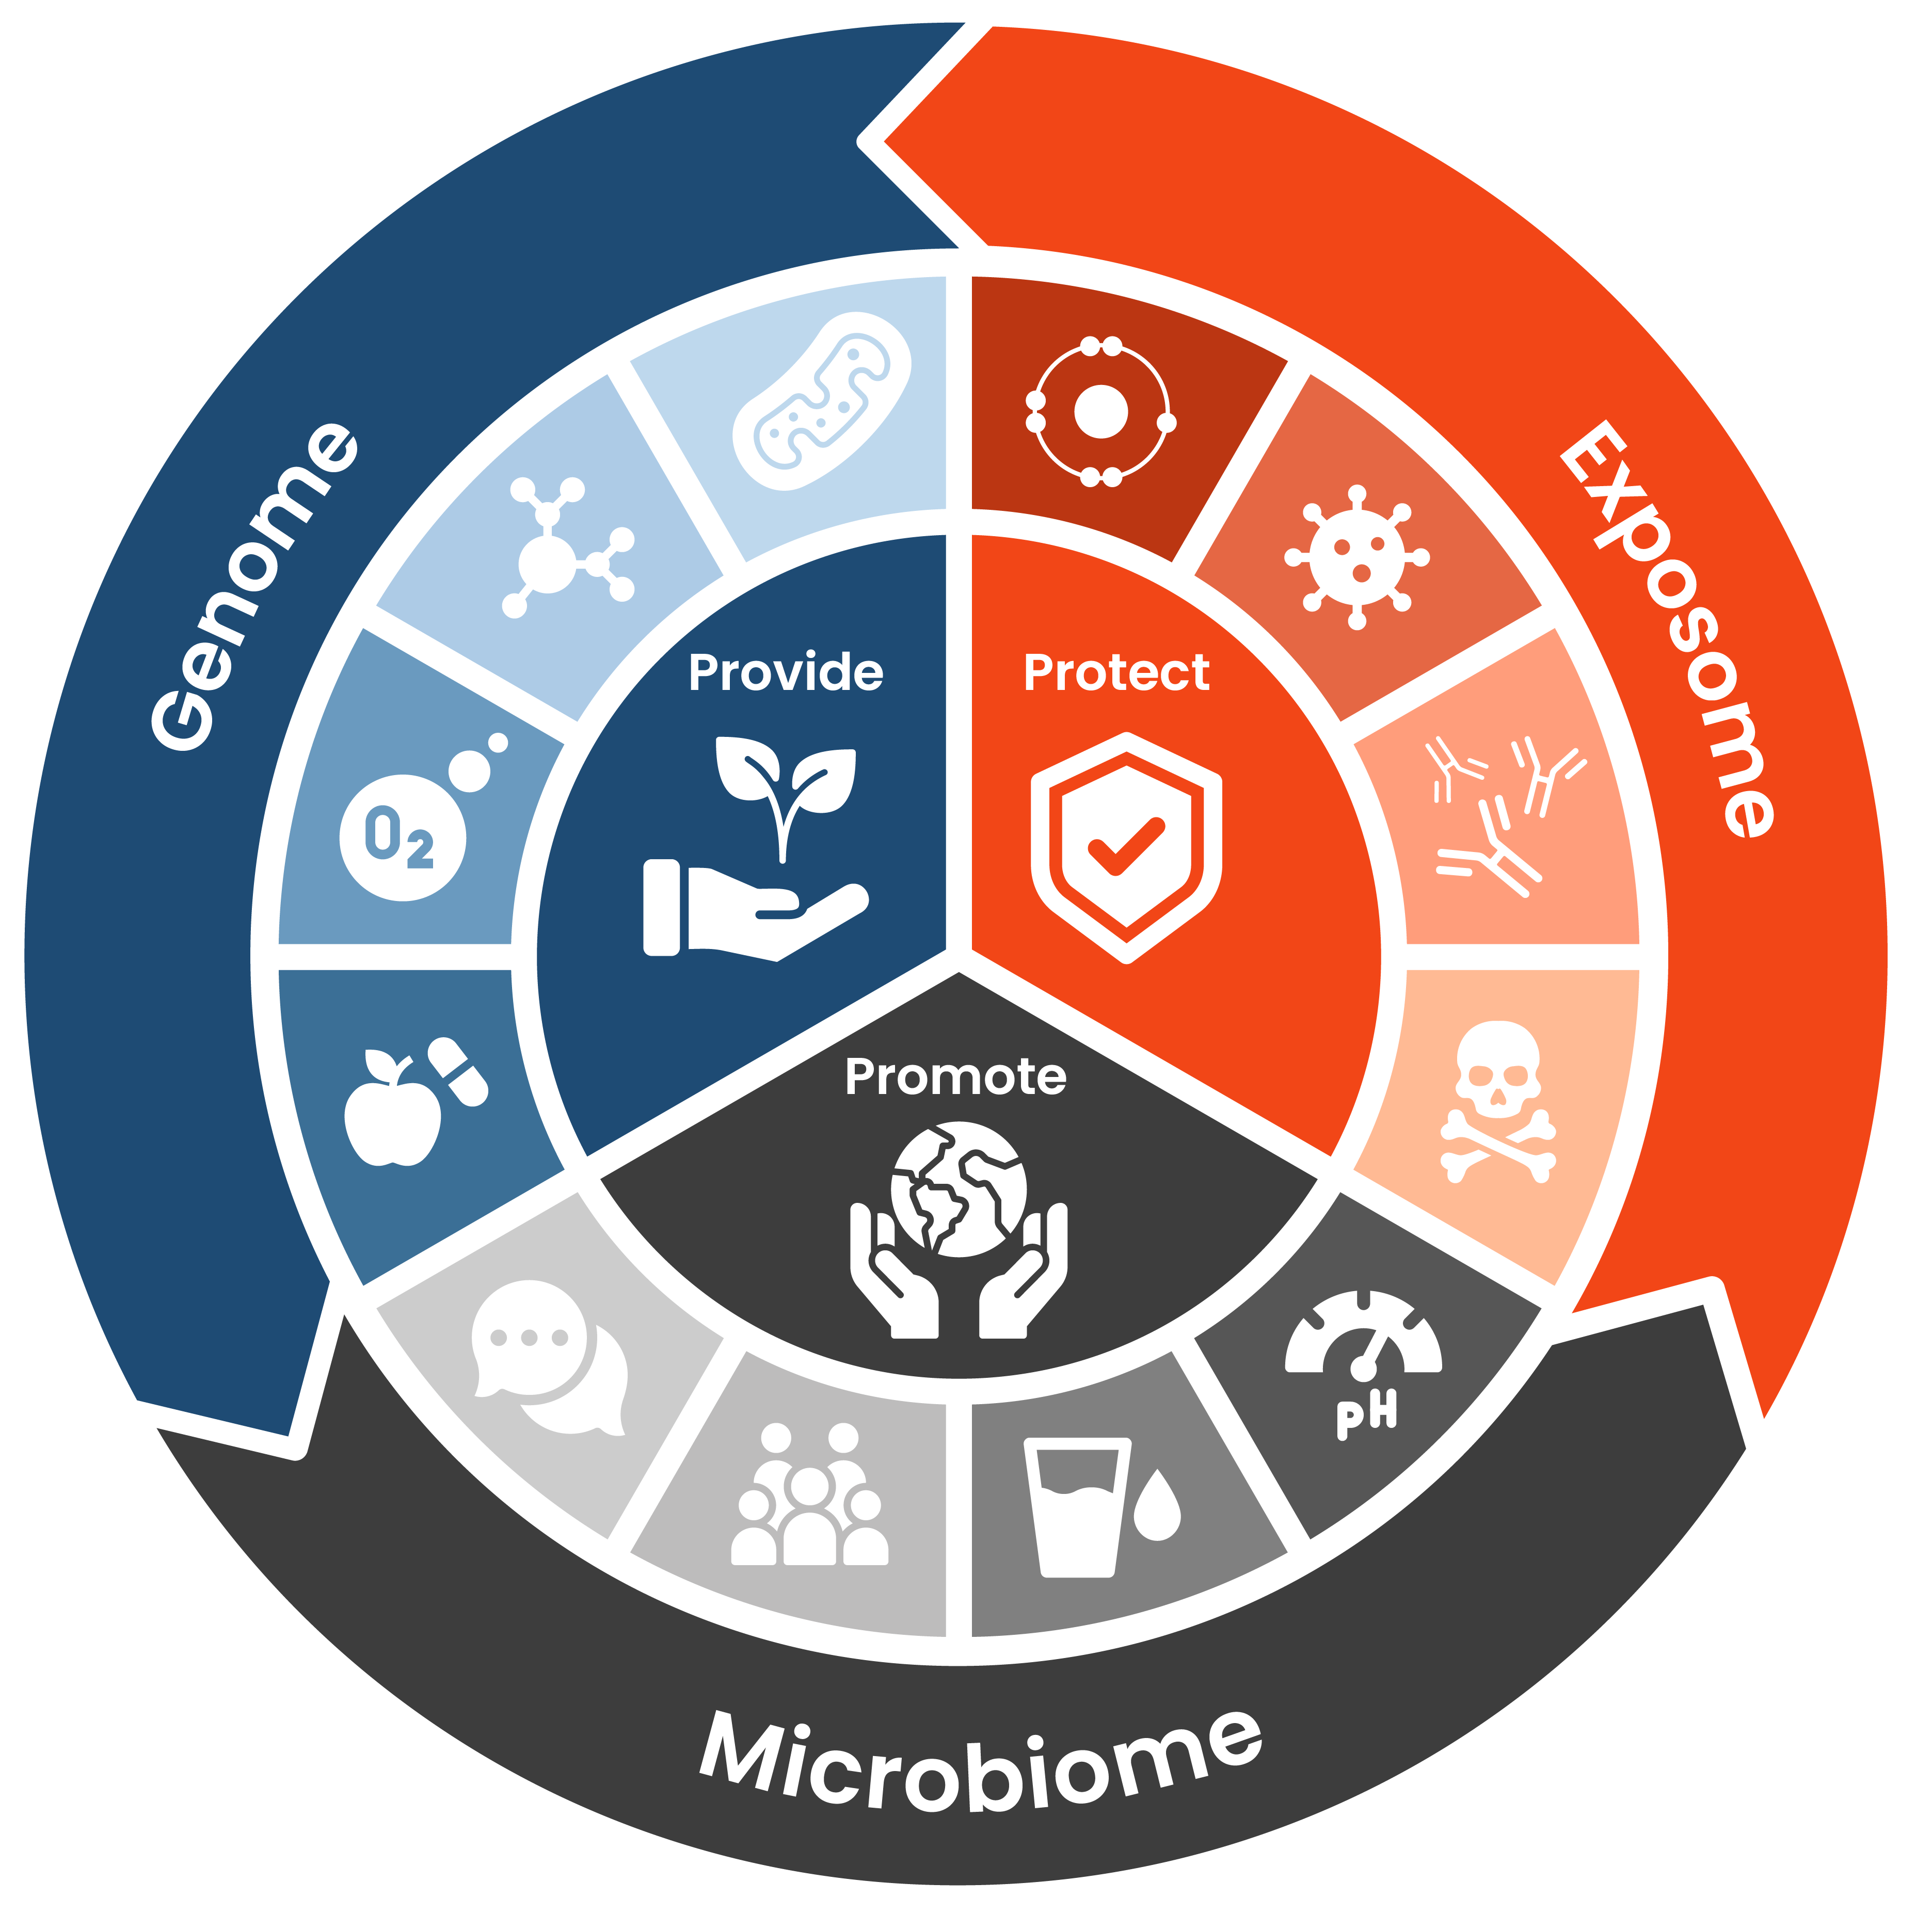 Circular diagram showing three equally-weighted parts of the Cell Blueprint: Genome, Exposome, and Microbiome. The genome section is broken down into various icons and falls into the Provide category. The exposome section is also broken down into various icons and falls into the protect section. Lastly, the mirobiome section is also broken down into various icons and falls into the promote section.